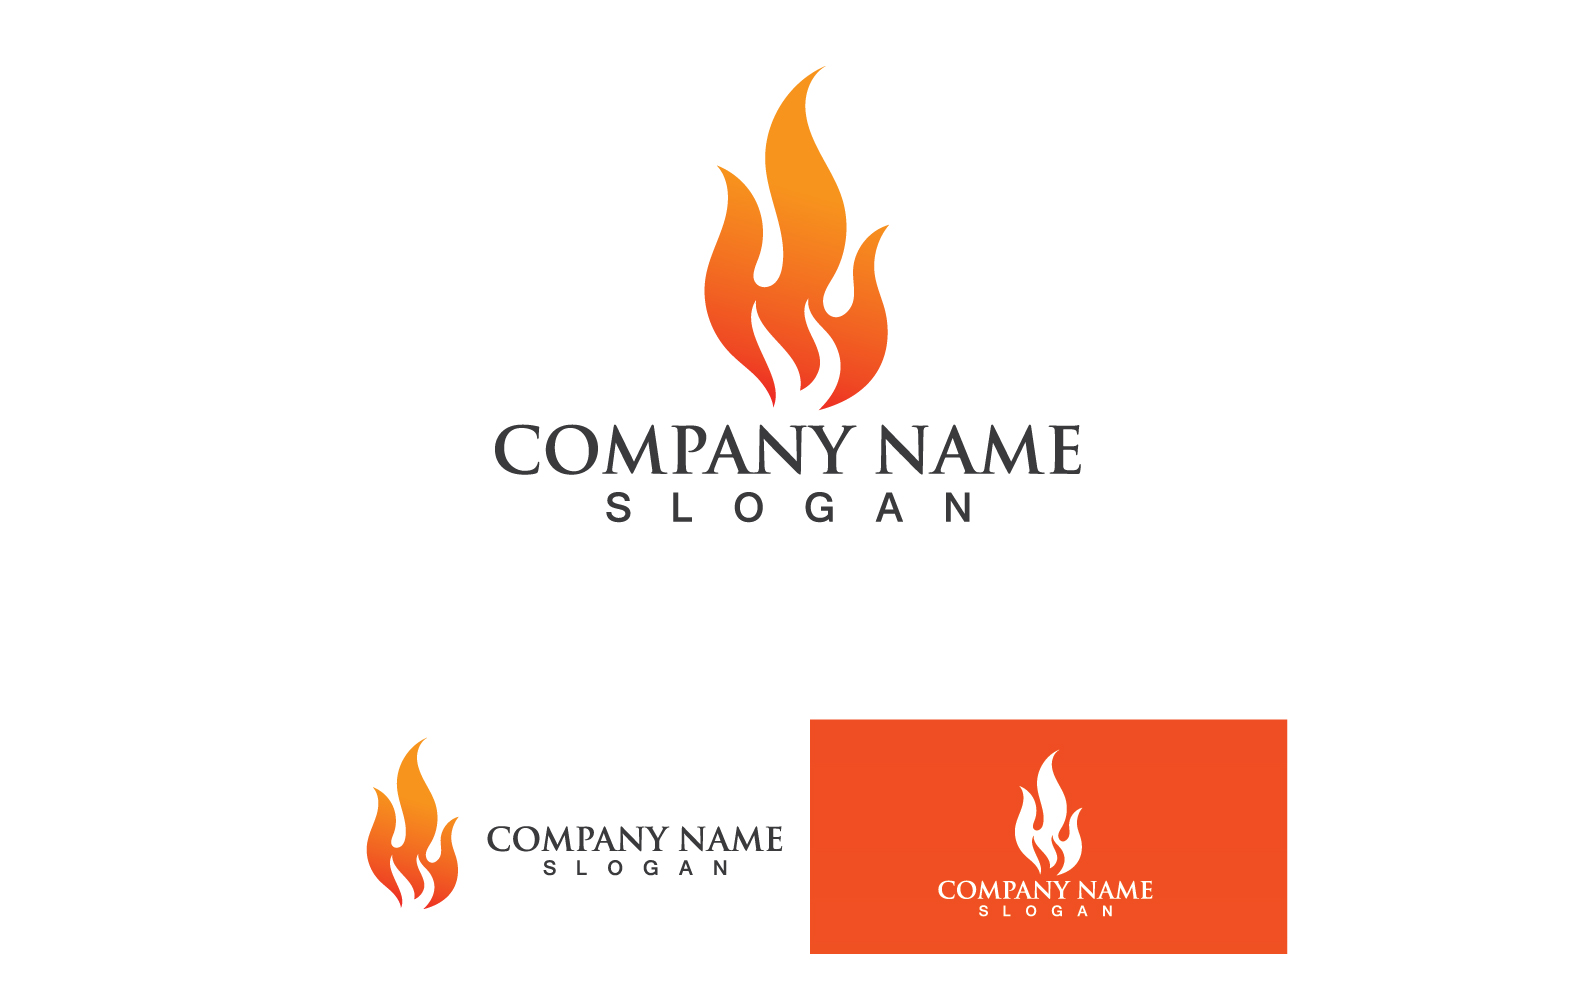 Wing Bird Business Logo Your Company Name V17